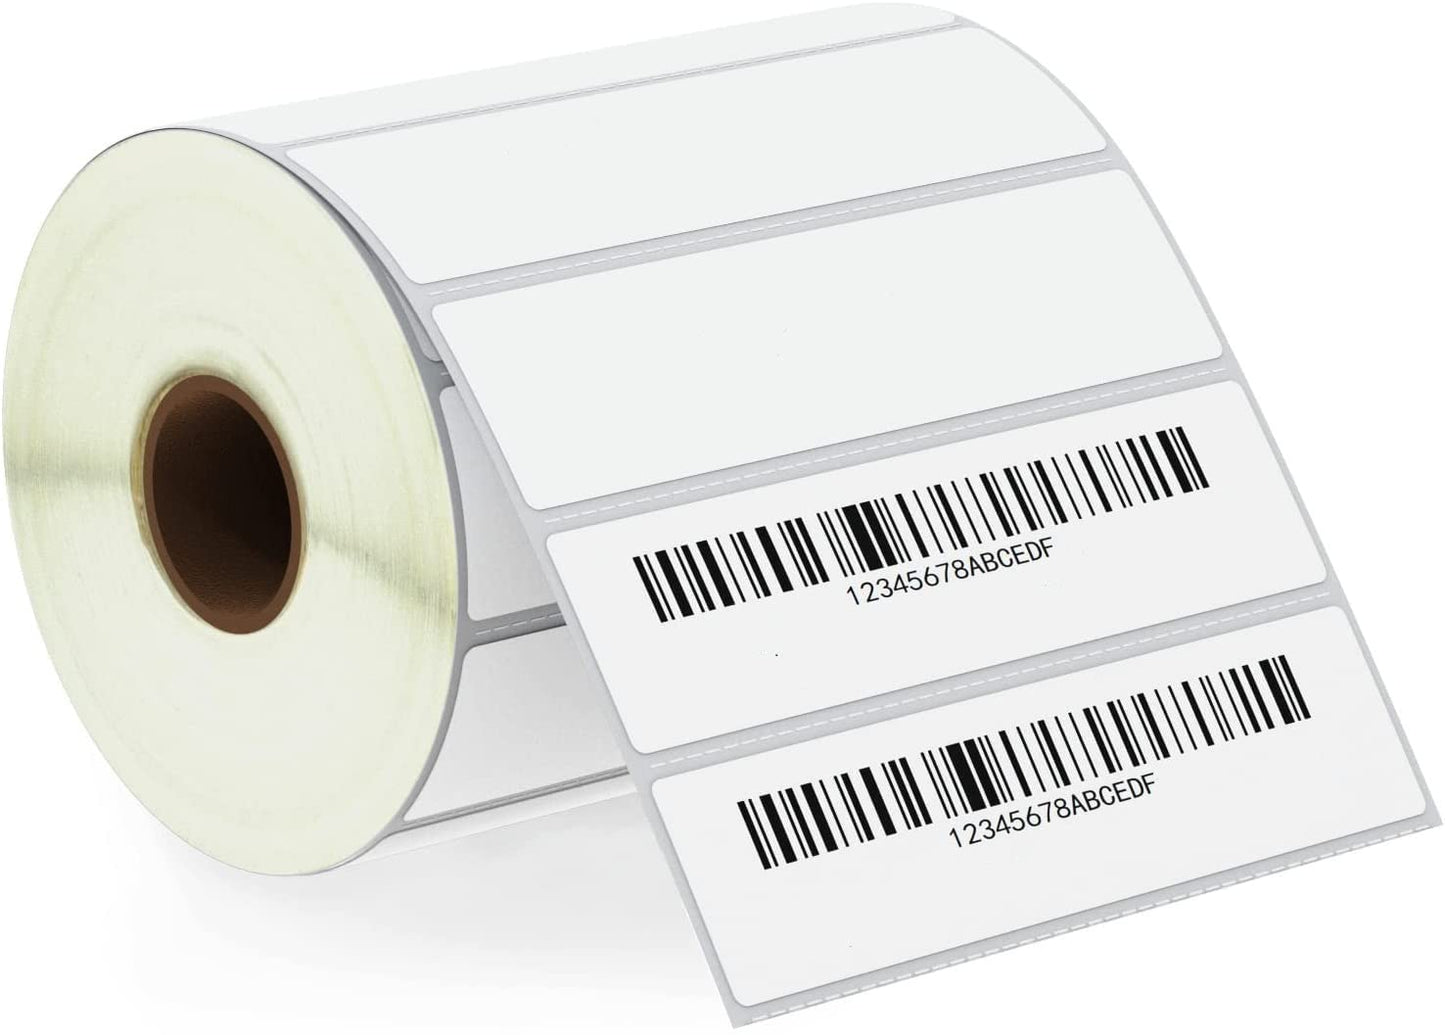 KIYA 100X25 Barcode Label Sticker  - 100mm x 25mm - 1 Ups - 500 Labels Per Roll - White Self Adhesive Sticker for Printing Barcoding (1 Roll Per Pack (1000 Labels))